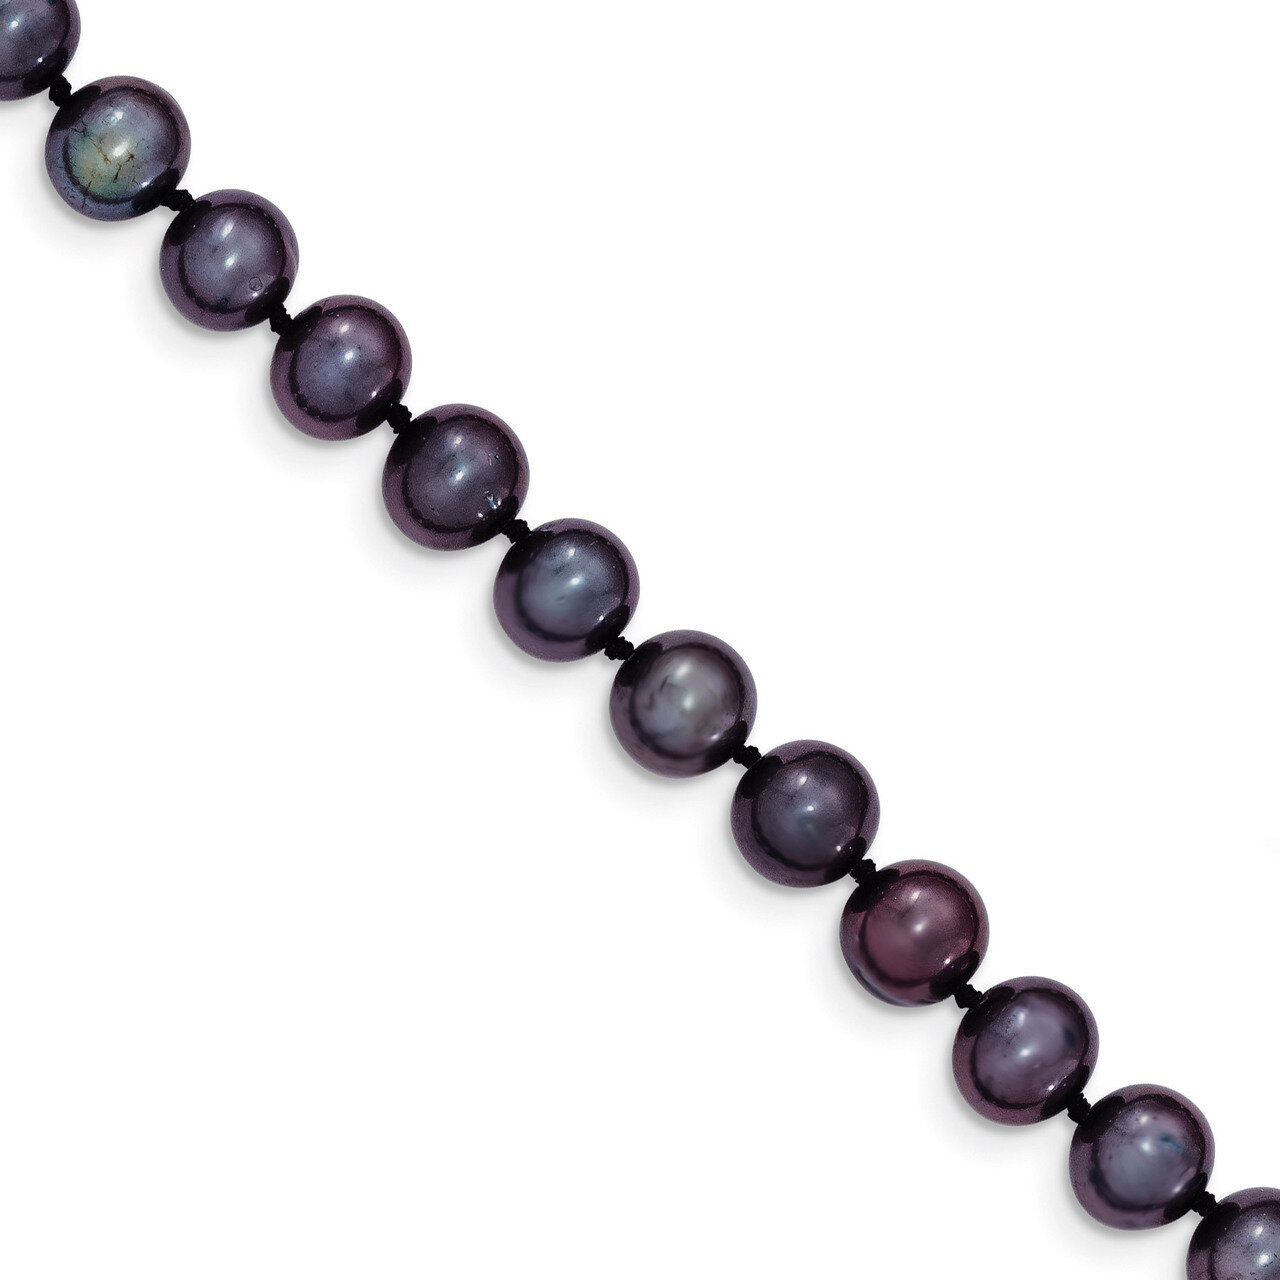 7-8mm Black Cultured Near Round Pearl Necklace 16 Inch 14k Gold BPN070-16